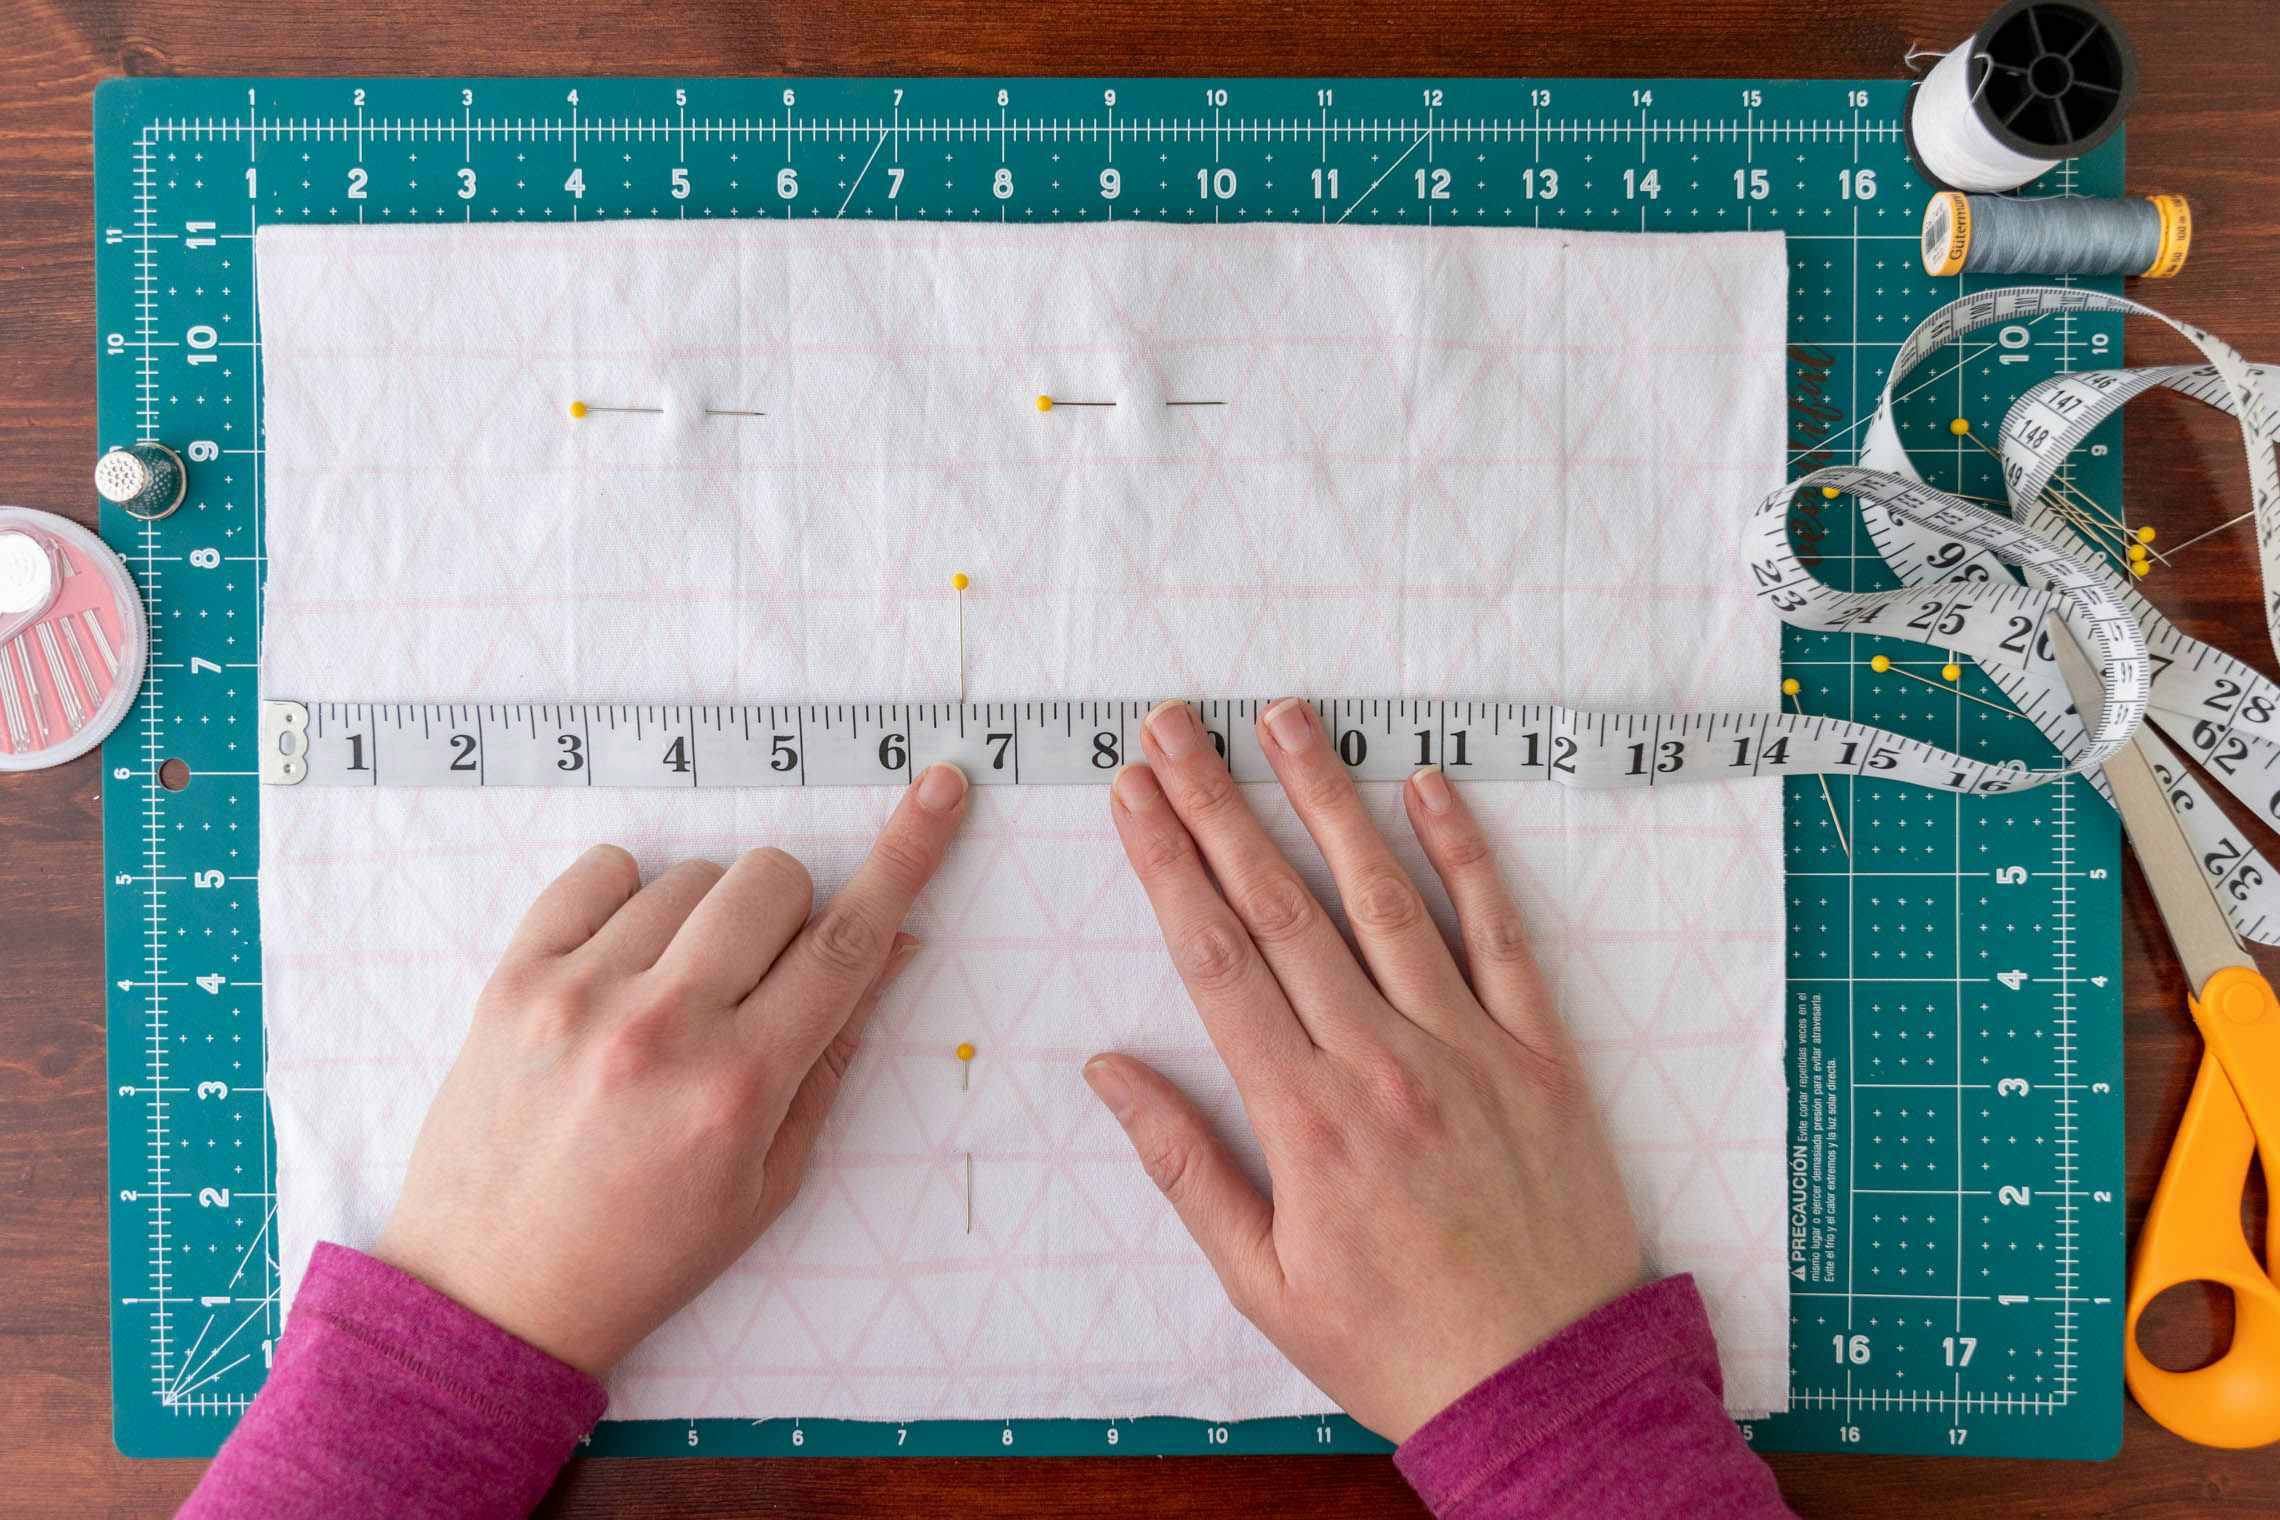 A cutting mat, sewing needles, thread, scissors, and a measuring tape laying on top a piece of fabric. Two hands are positioned on top, pointing to a measurement on the tape measure.